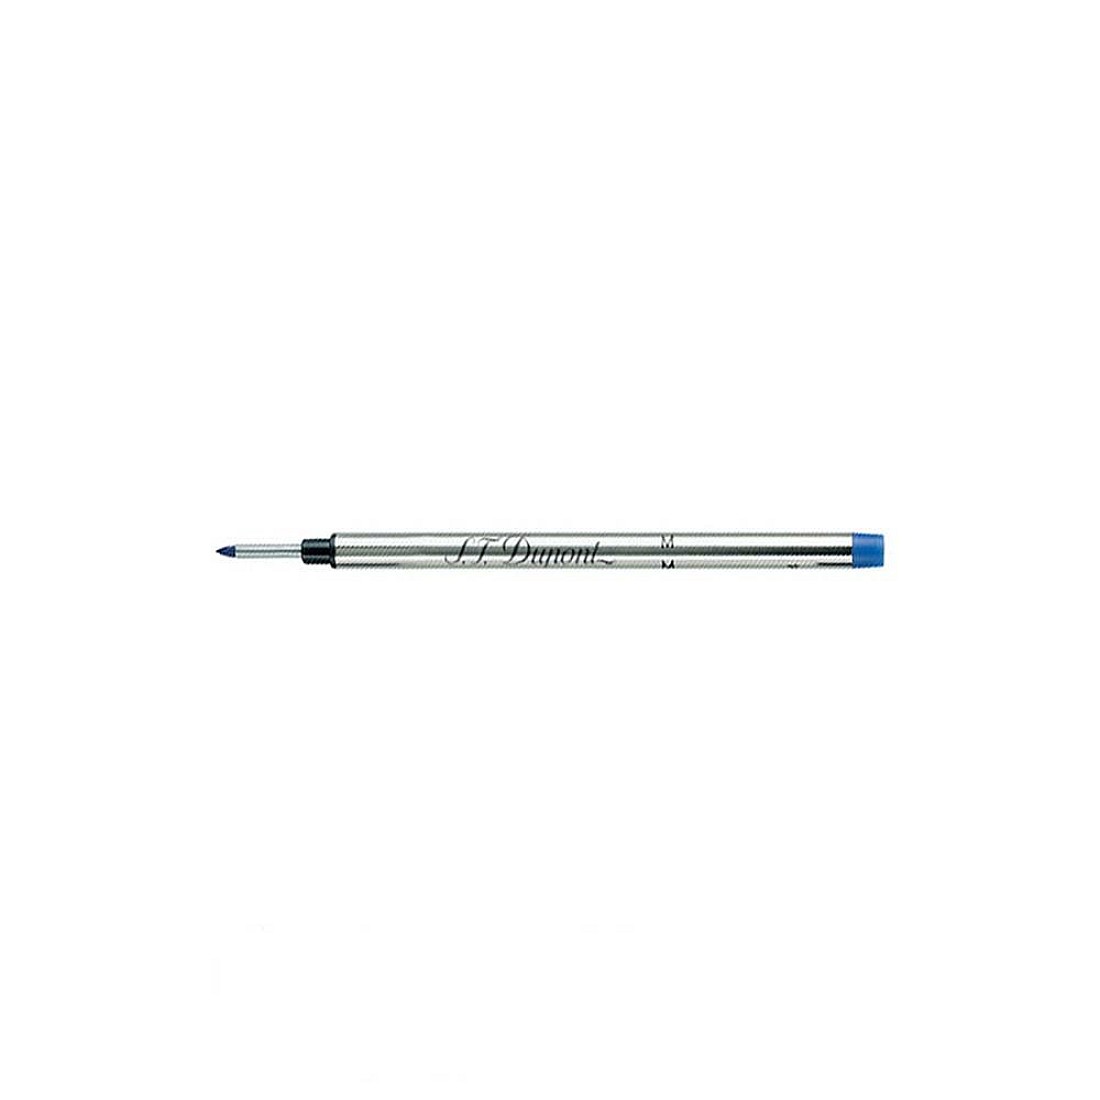 S.T. Dupont Fineliner Refill (2 colors)